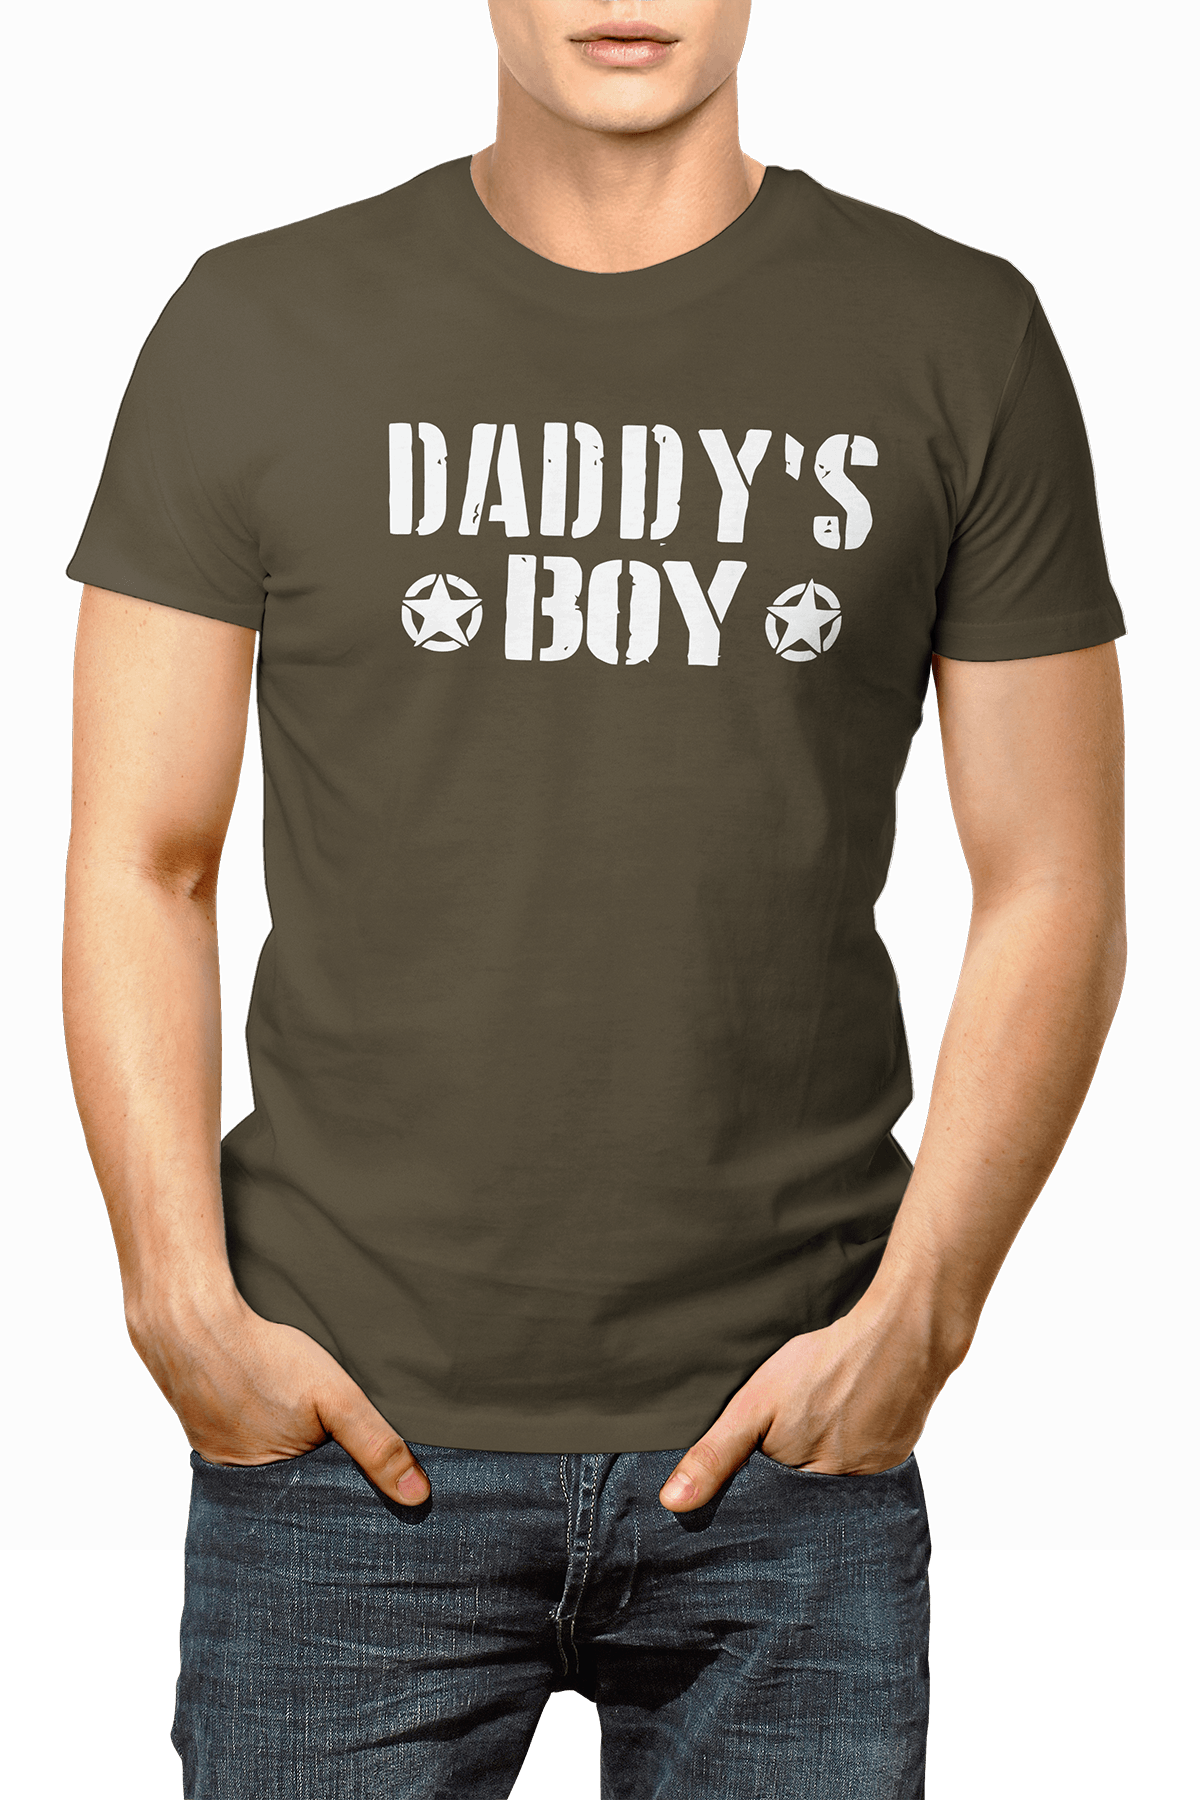 Daddys Boy Graphic Tee